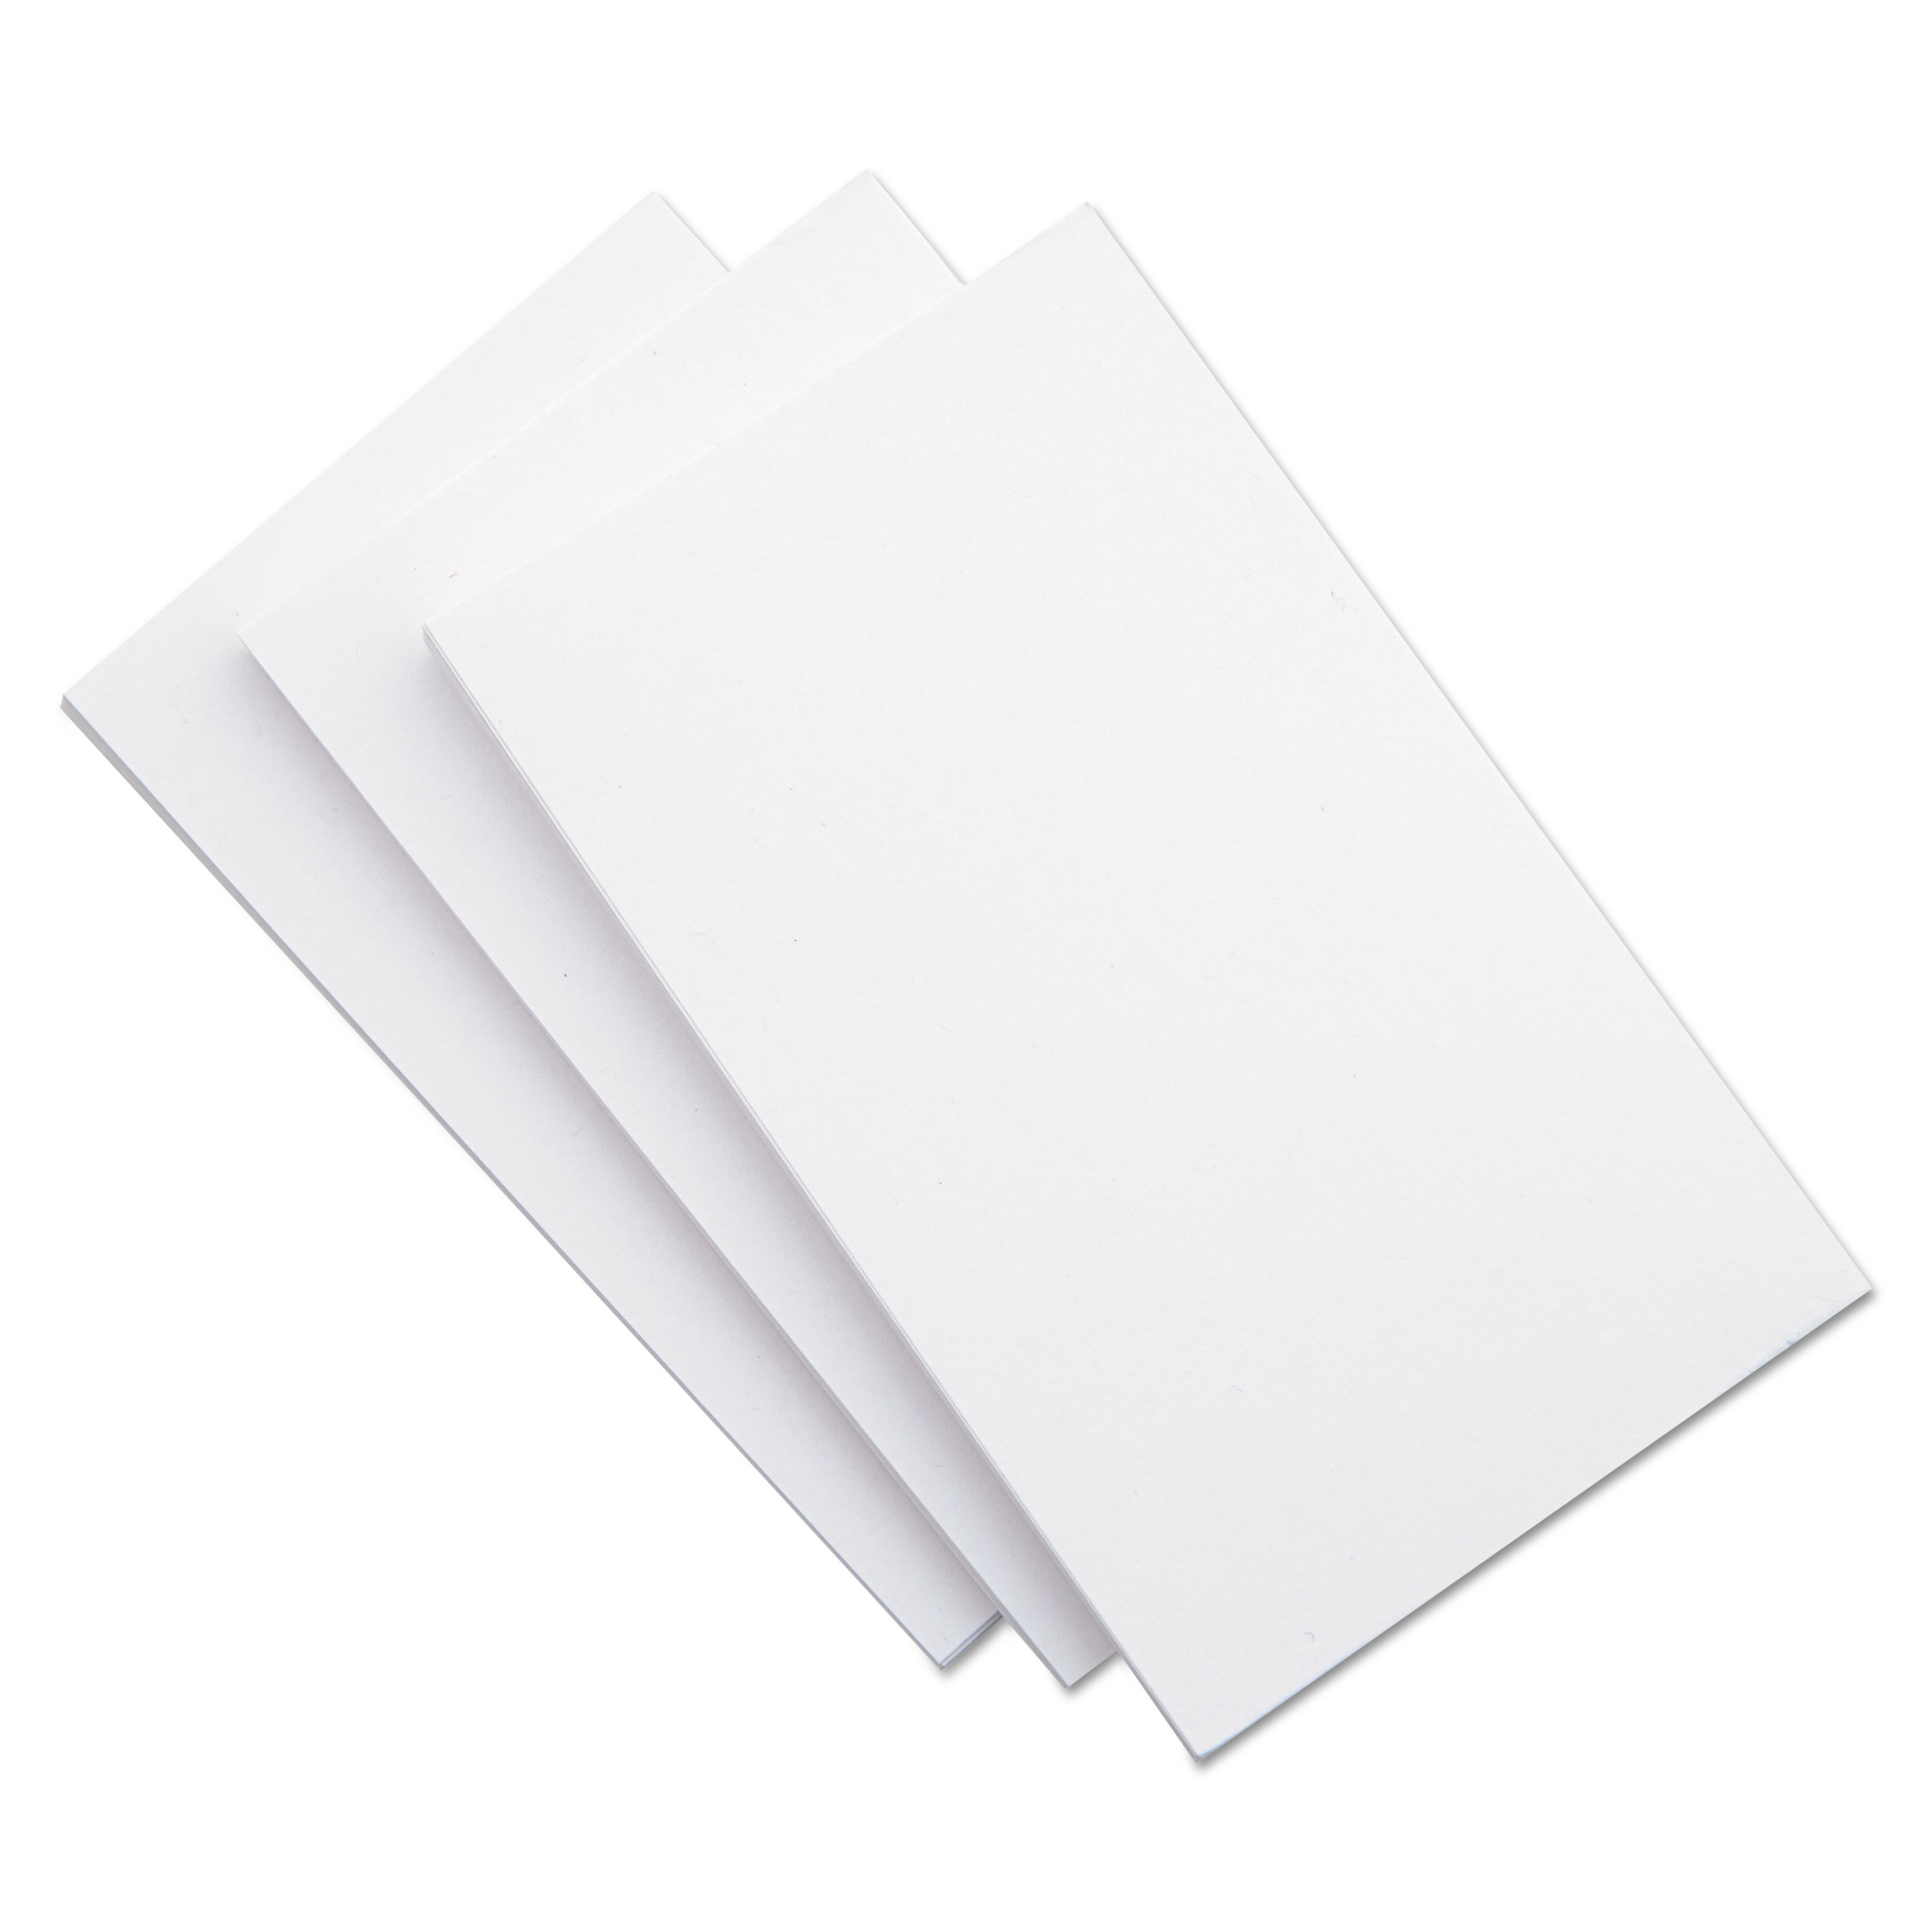  Universal UNV47240 Unruled Index Cards, 5 x 8, White, 100/Pack (UNV47240) 